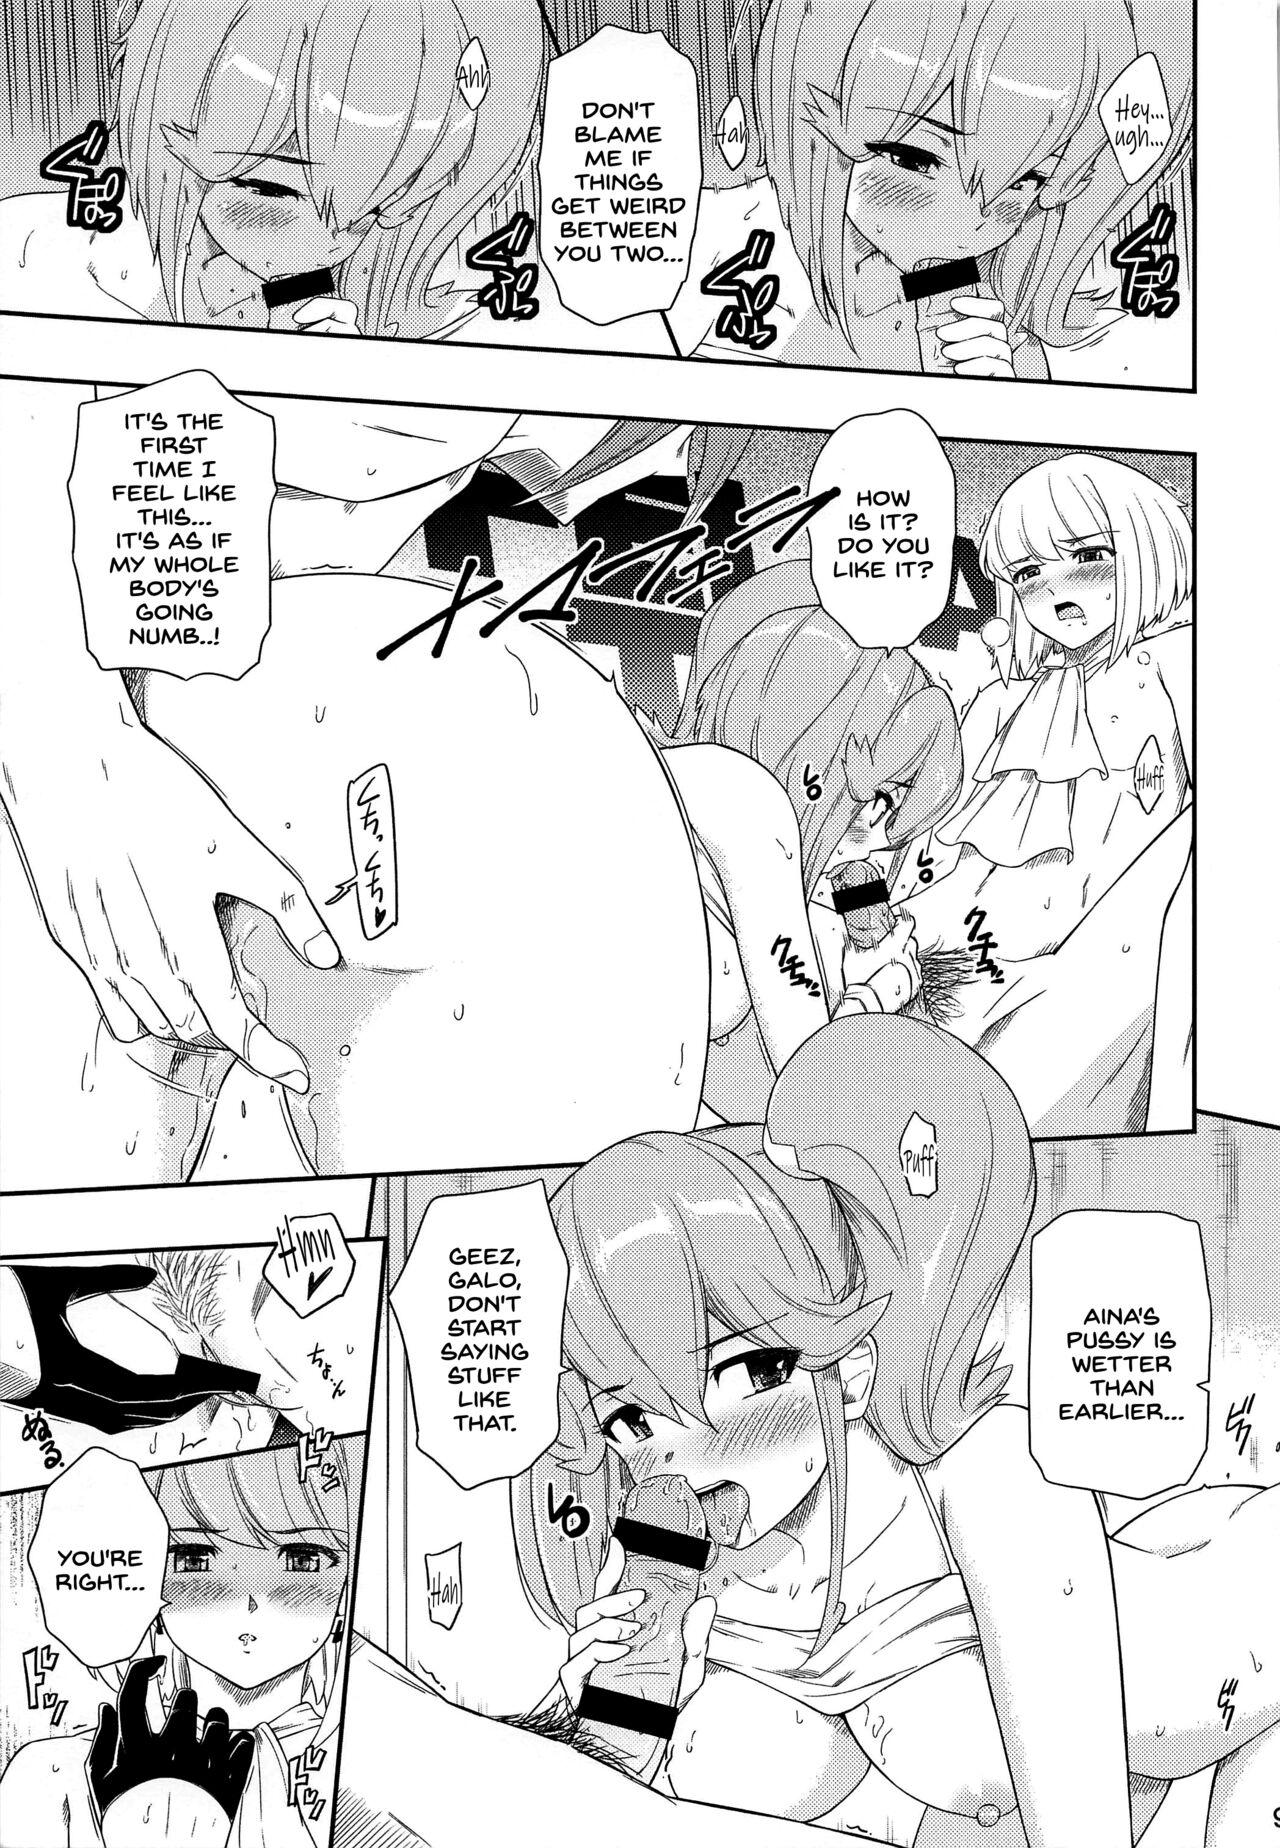 Soft EROMARE - Suddenly 3P sex is happening... Ball Busting - Page 8